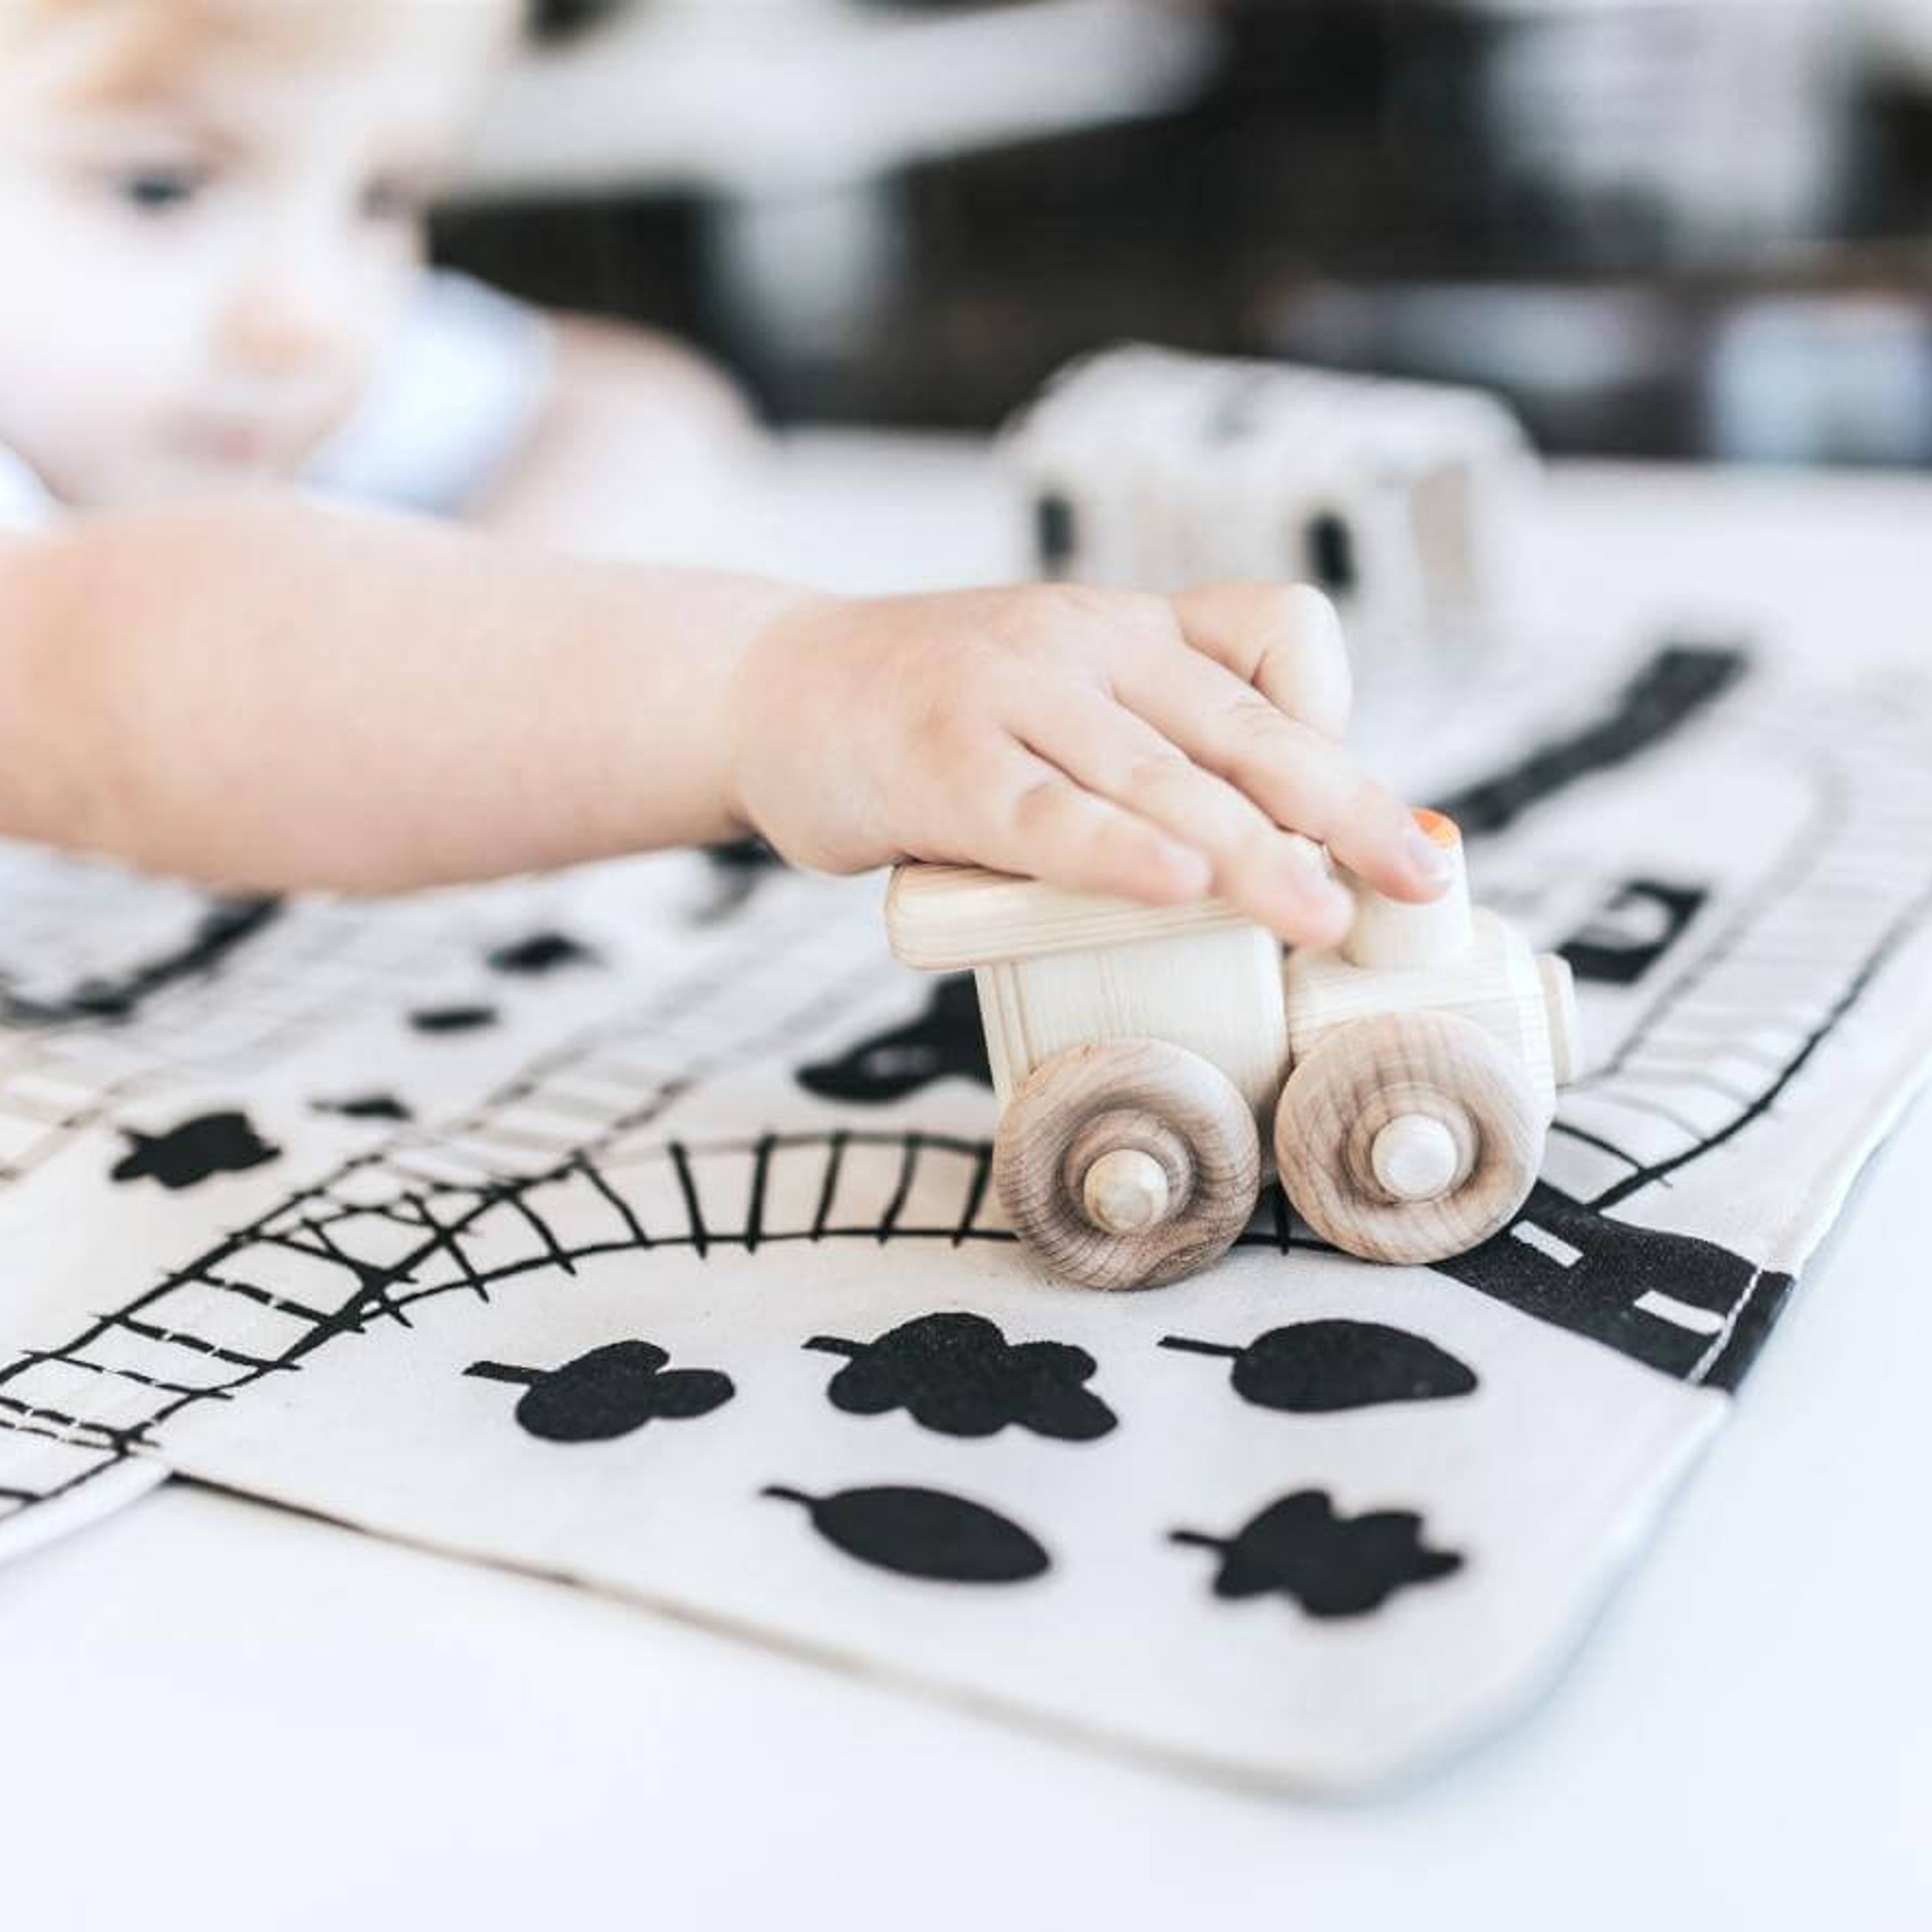 Train Play Mat: "Love it! Super cute for on the go play!"